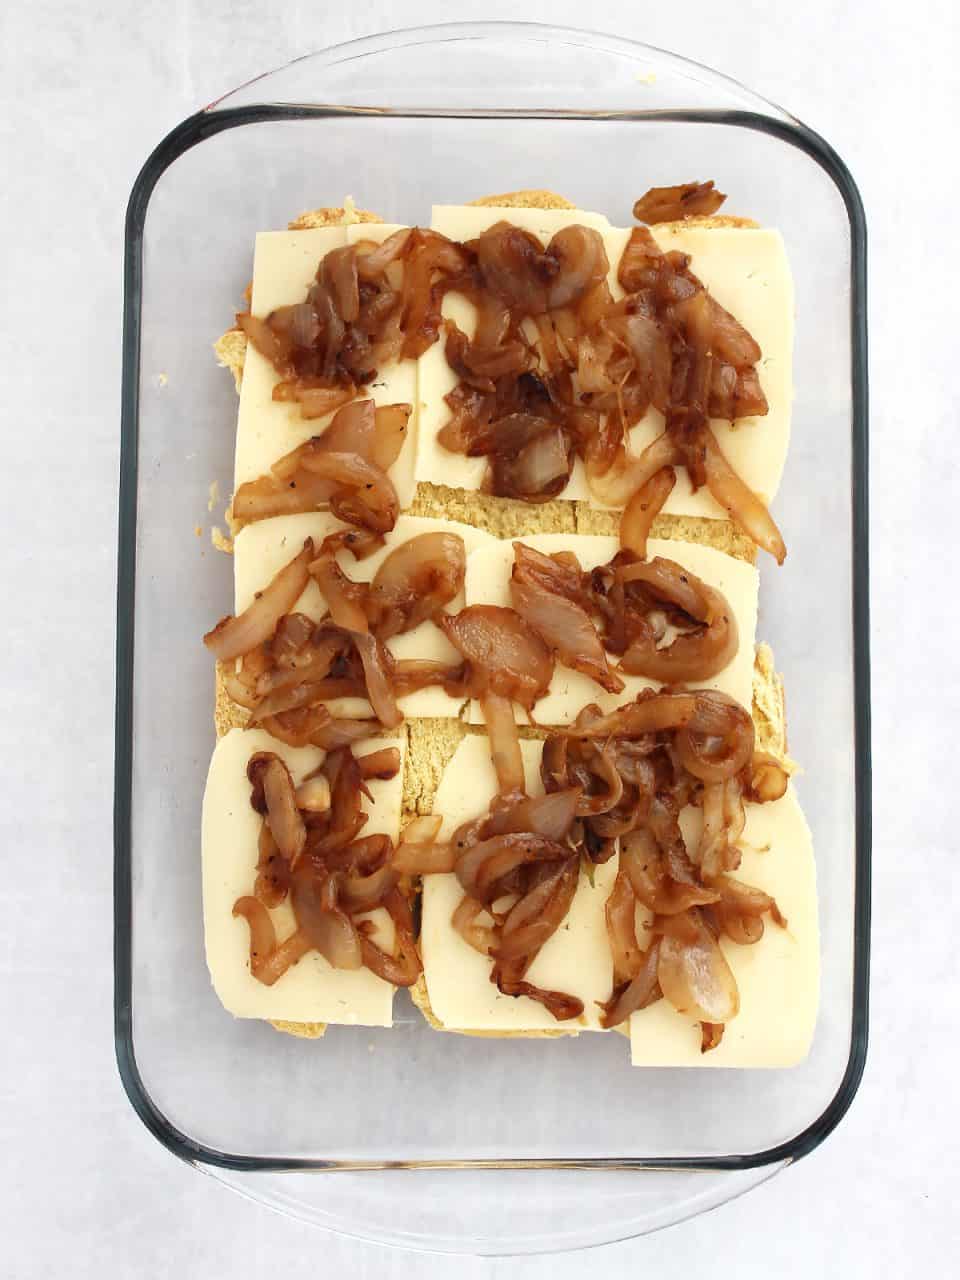 Caramelized onions placed on top of the cheese slices.